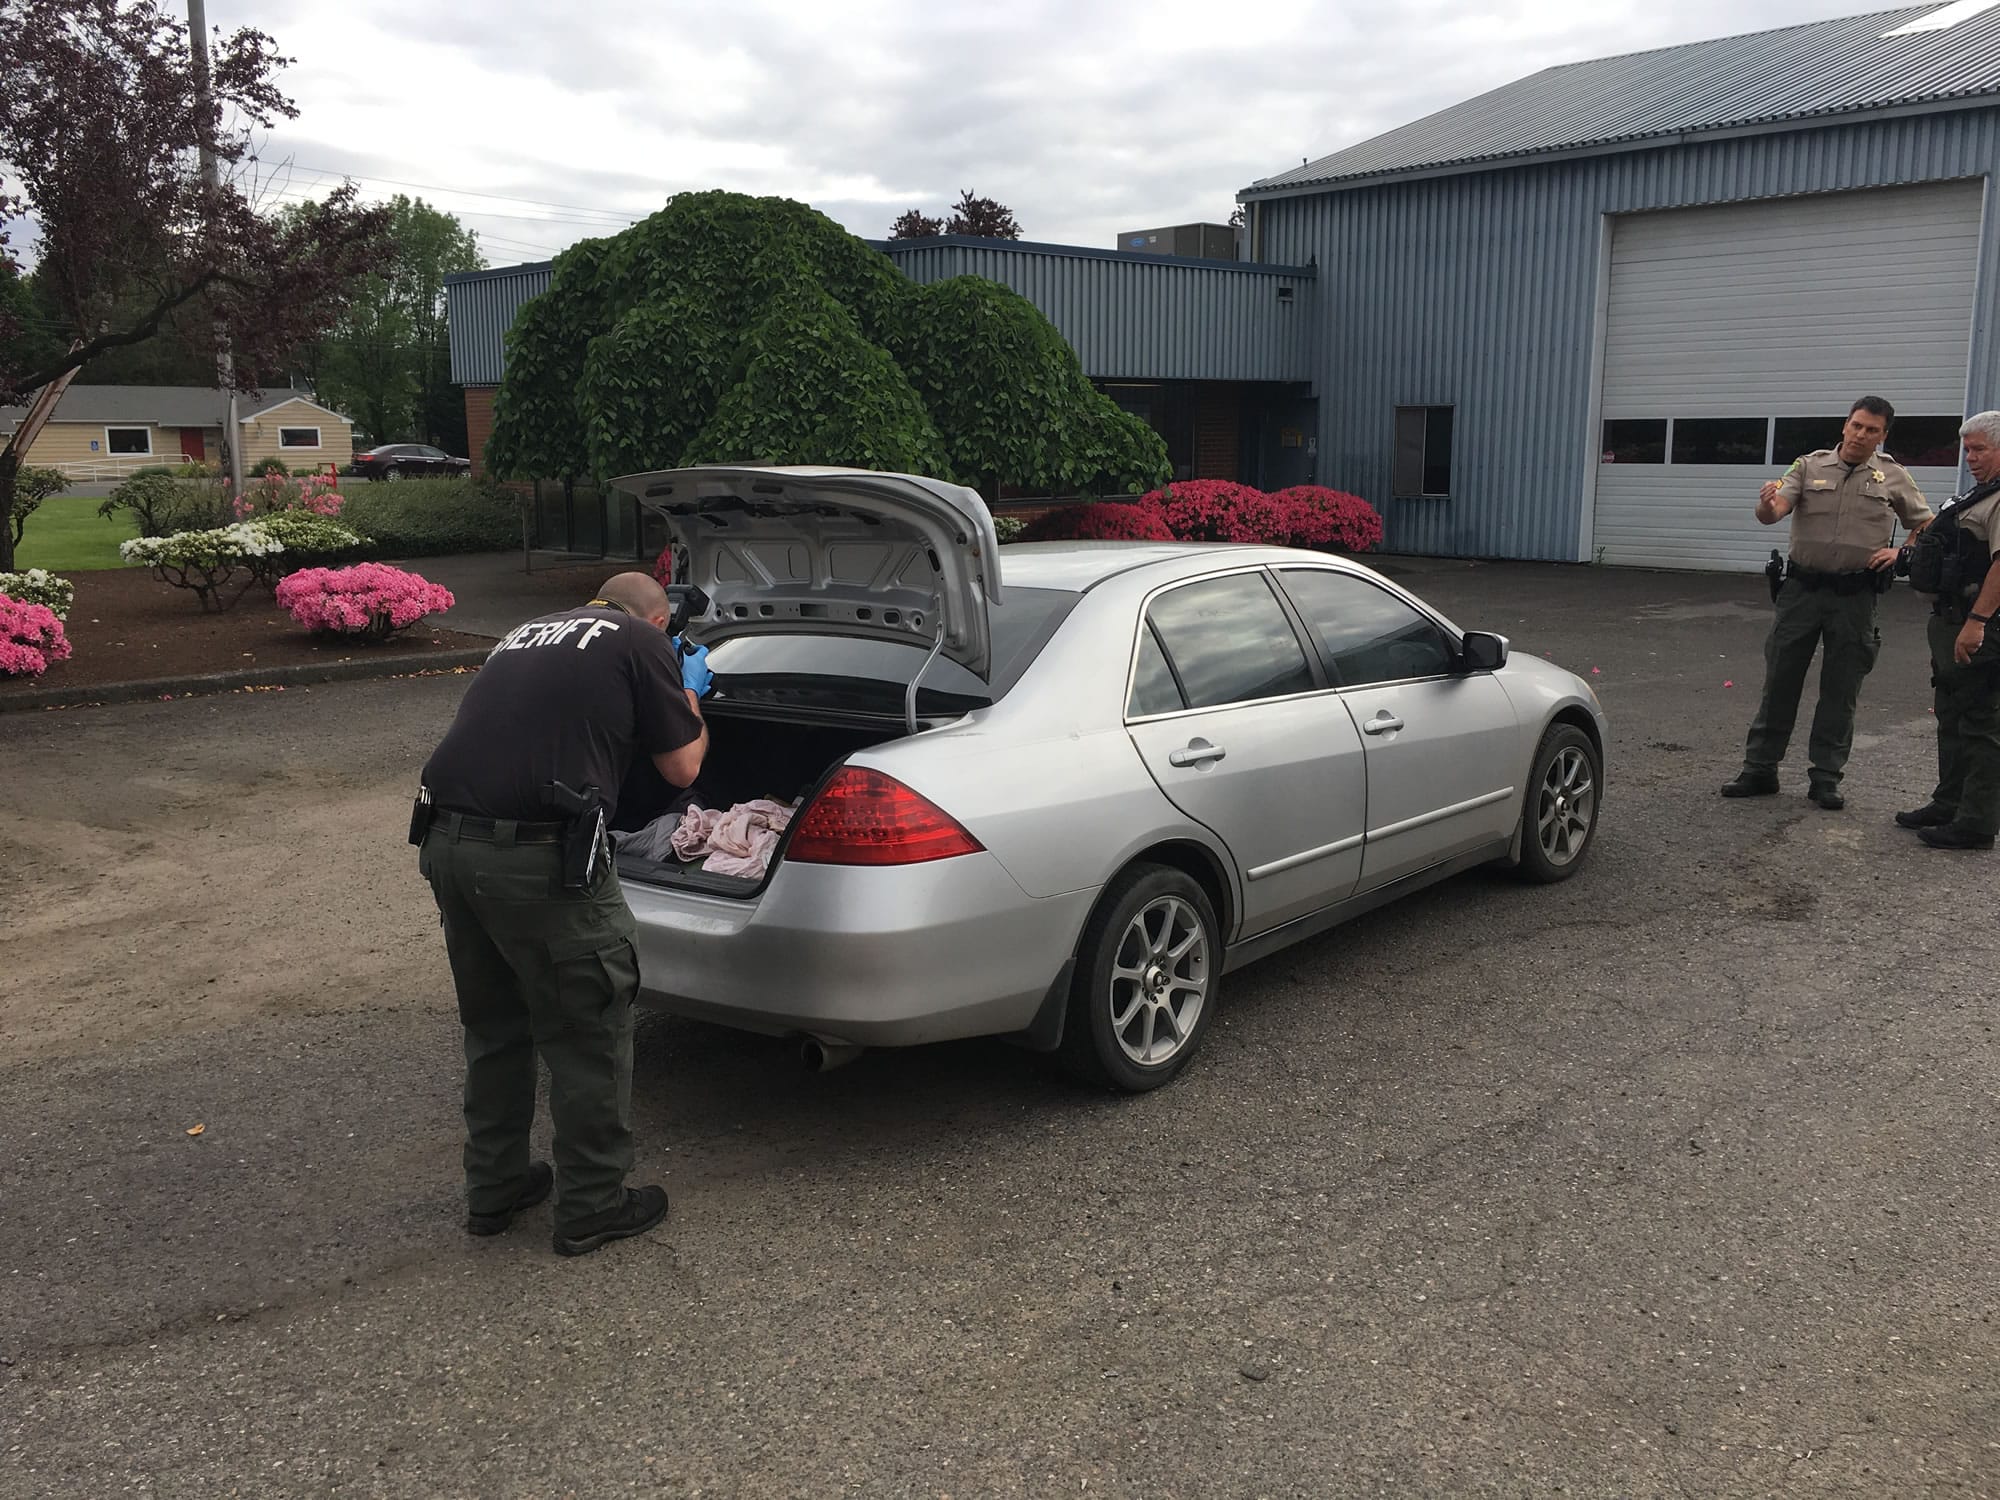 A detective photographs contents of a car's trunk as part of a domestic violence investigation Wednesday morning in Hazel Dell.